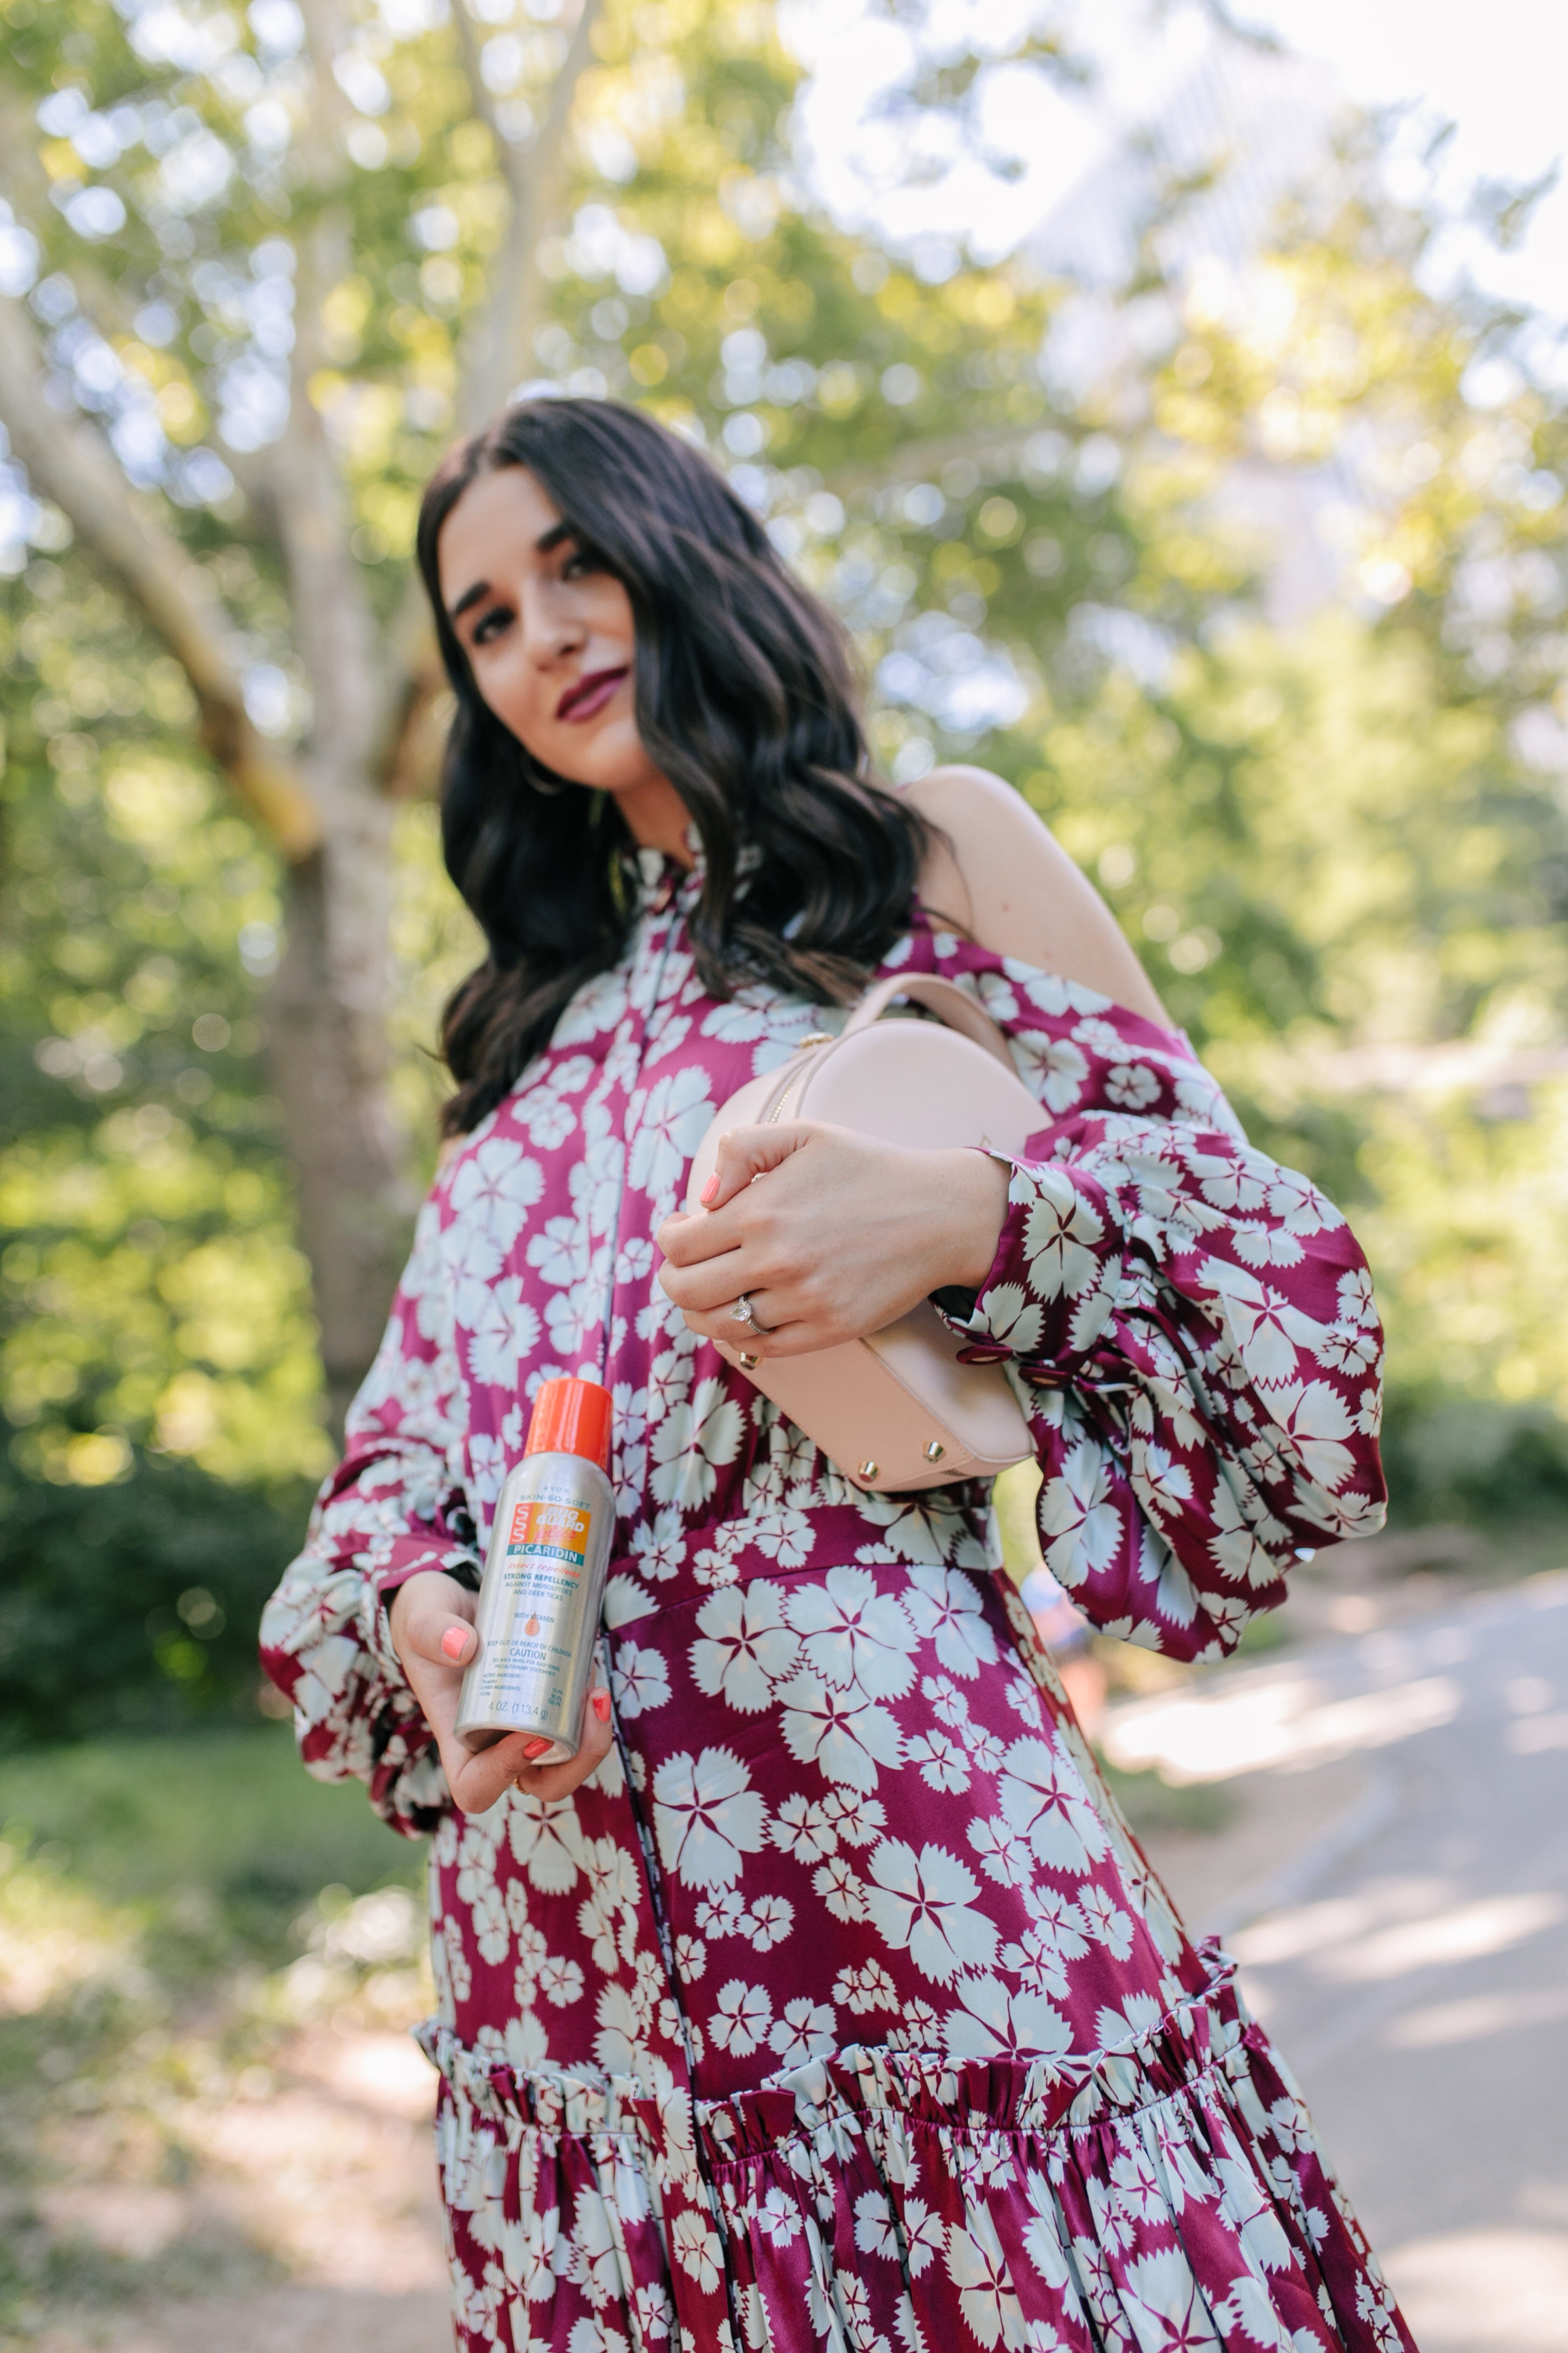 Bring On The Bug Spray Avon Bug Guard Esther Santer NYC Street Style Blogger Outdoors Adventure Explore Upstate New York Central Park Printed Dress Designer Product Review Button Front Photoshoot Brand Collab Beauty Skincare Cold Shoulder Circle Bag.jpg